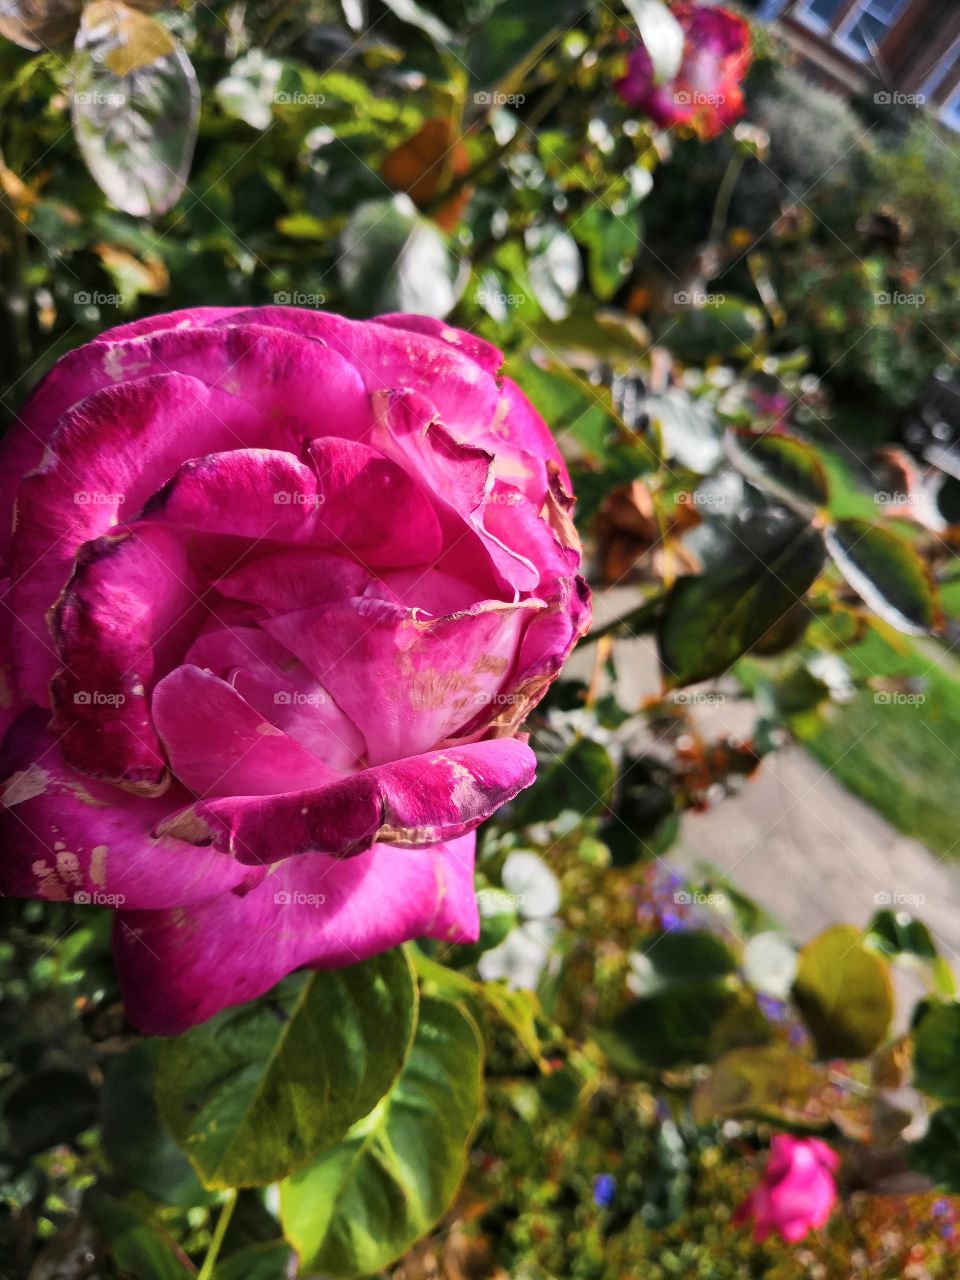 Pretty pink rose flower amongst leaves against an unfocused green background.